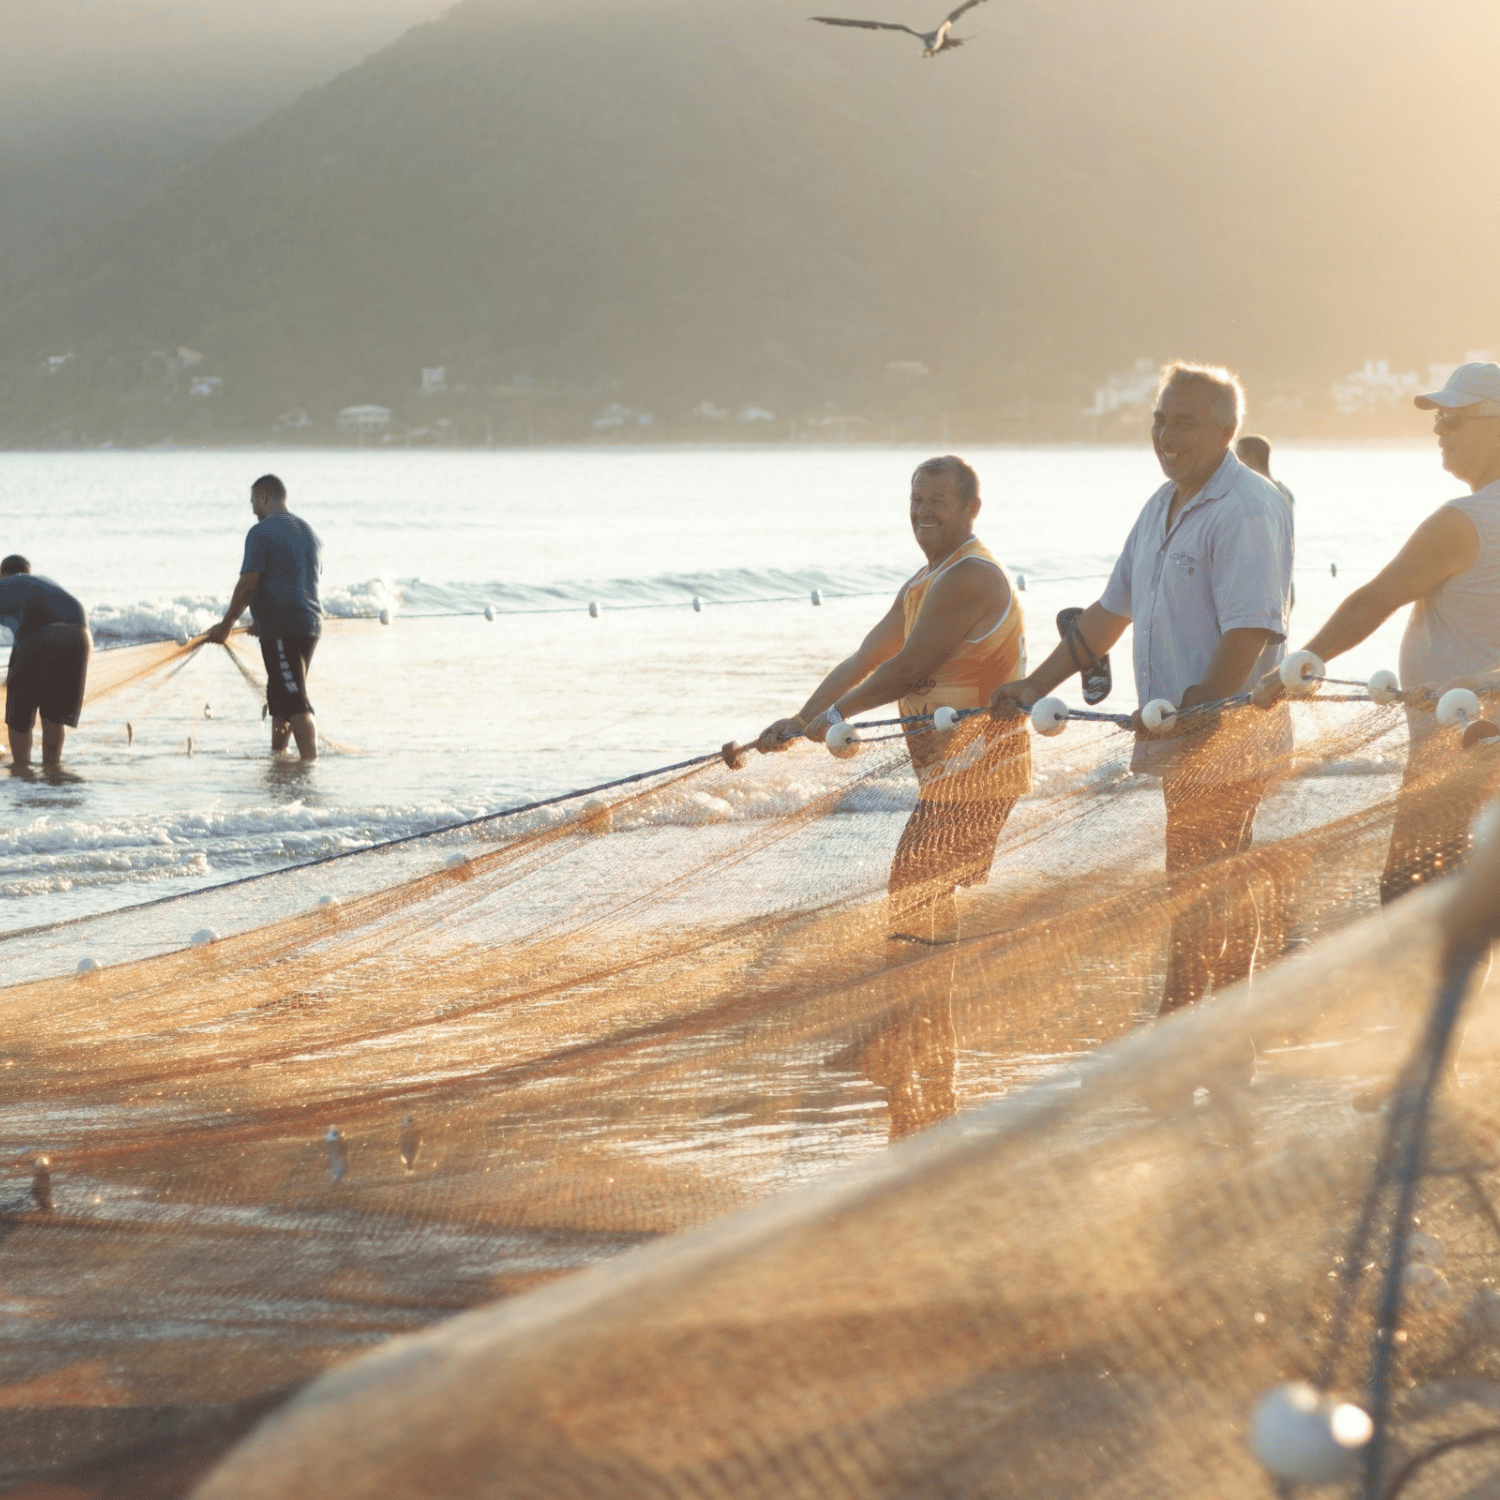 group of people stretching out a custom seine net in the ocean